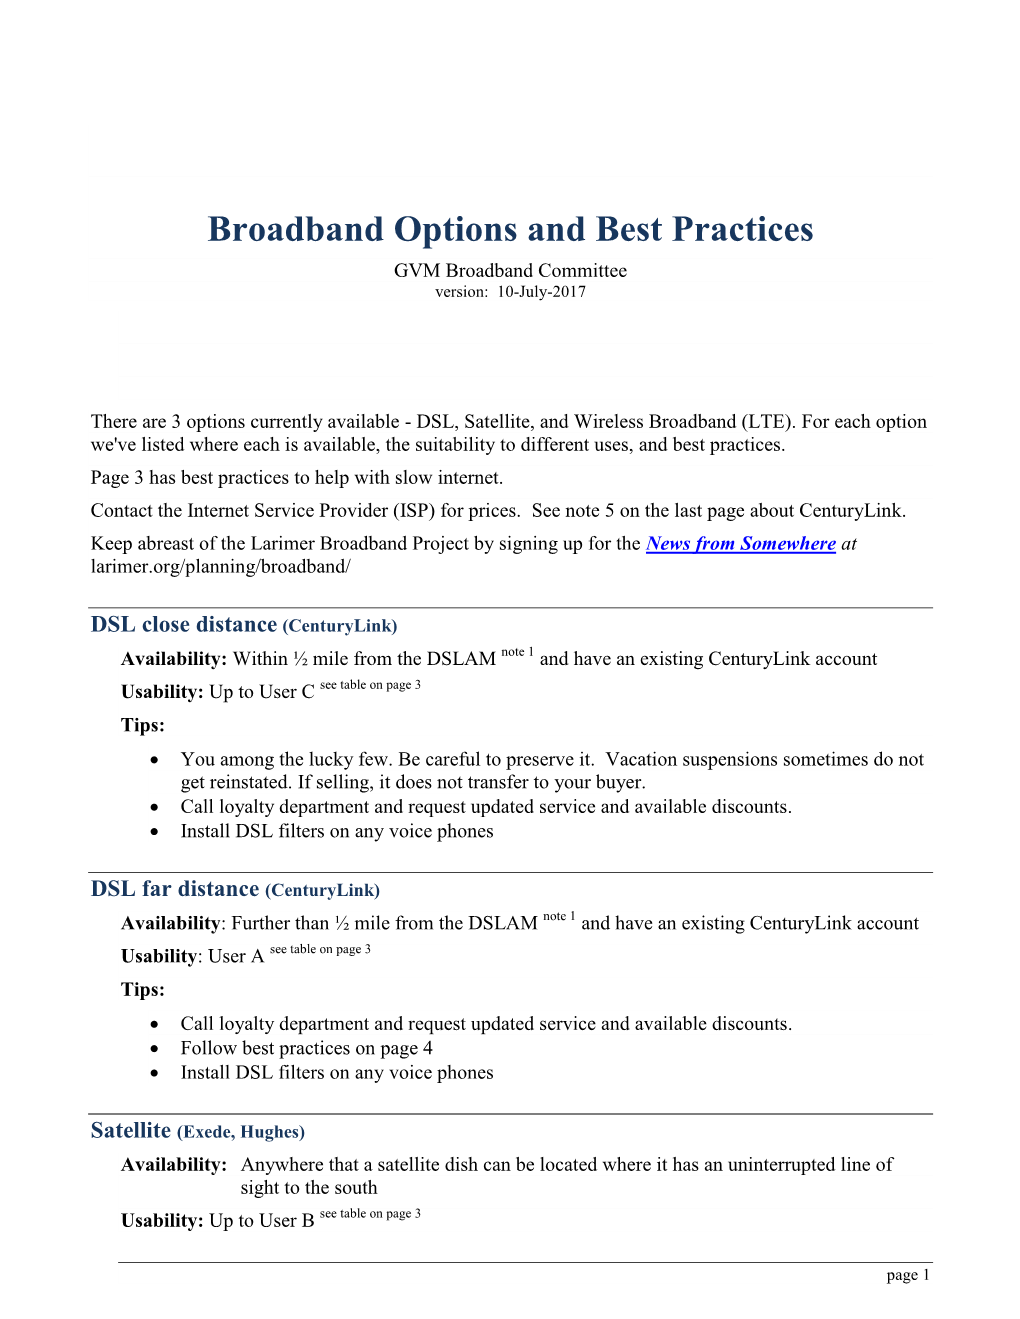 Broadband Options and Best Practices GVM Broadband Committee Version: 10-July-2017